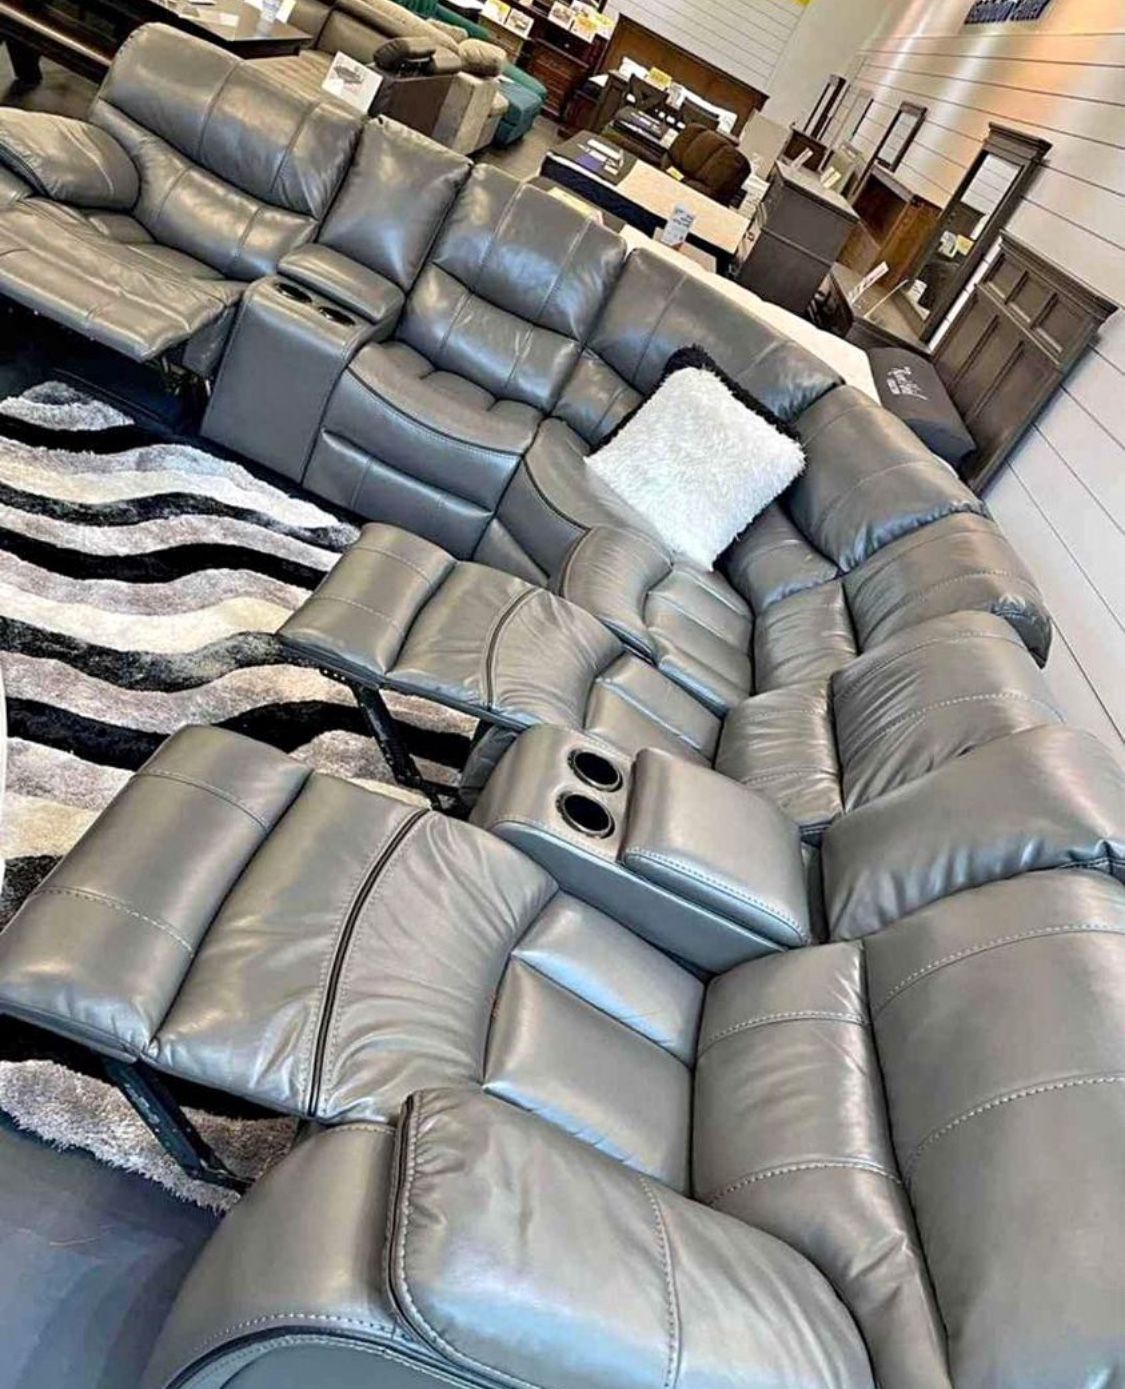 Spring Sale Event! Madrid, Gray Leather Reclining Sectional Now Only $1199. Easy Finance Option. Same Day Delivery.